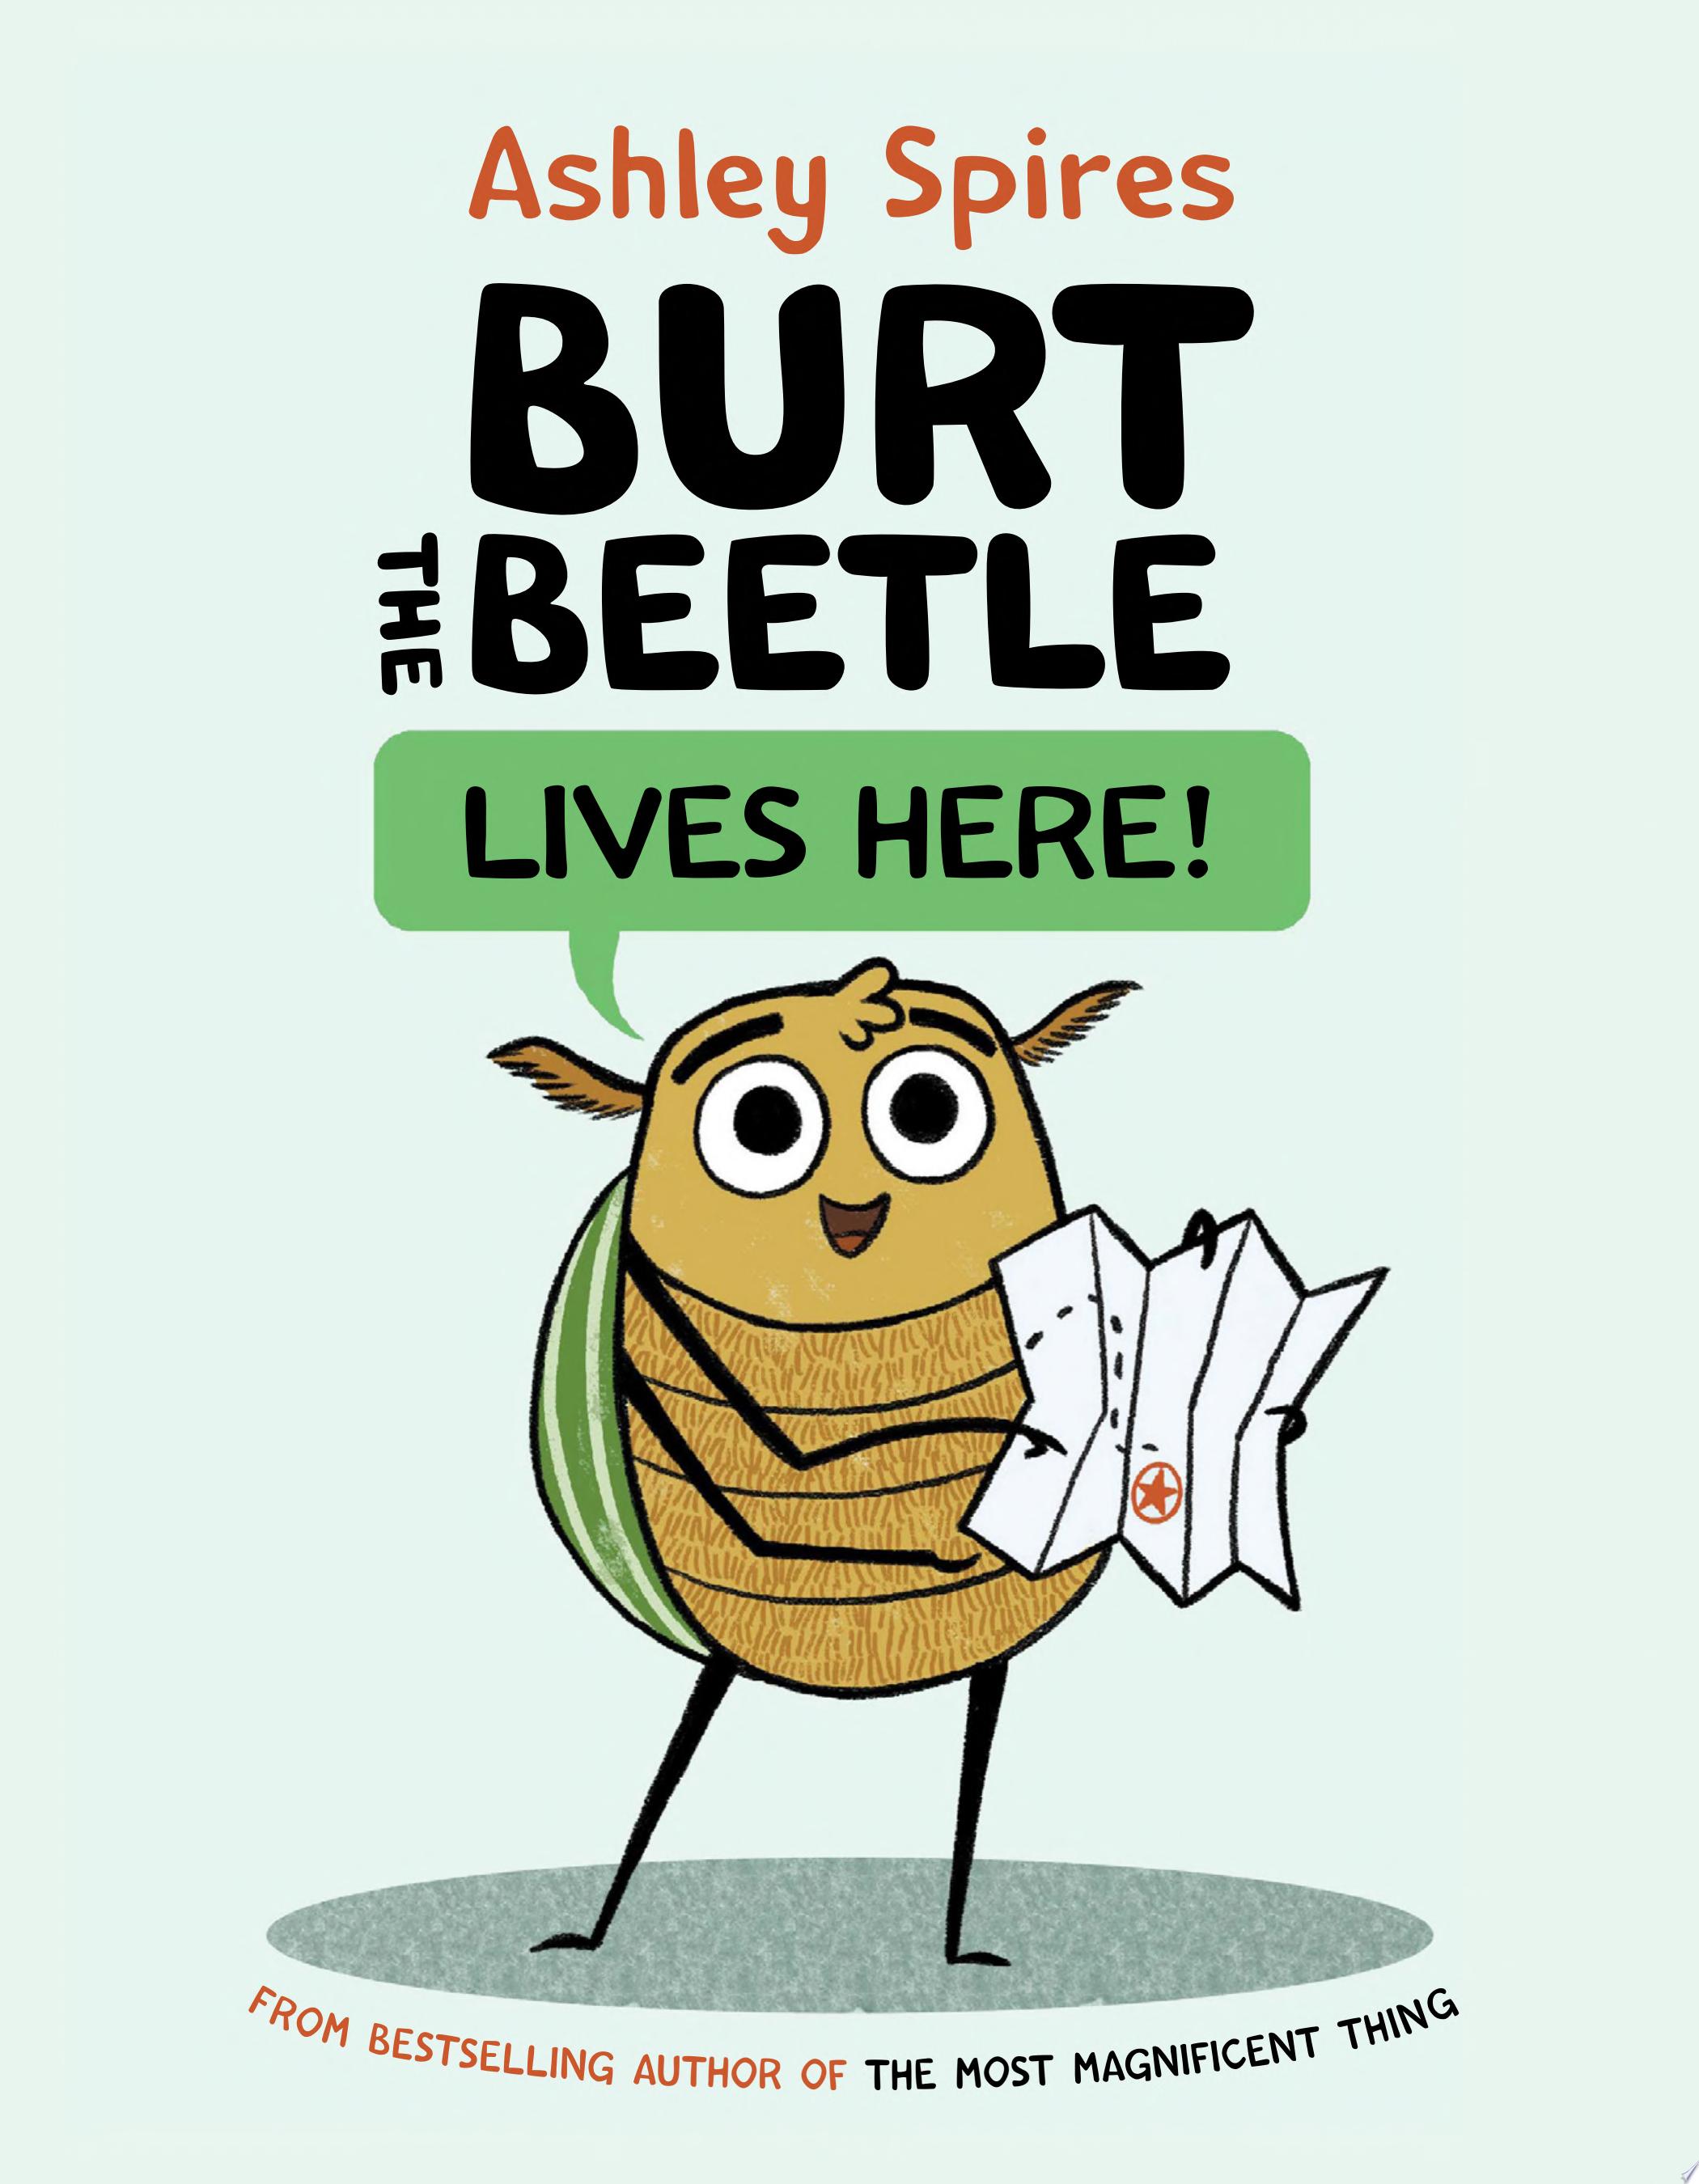 Image for "Burt the Beetle Lives Here!"